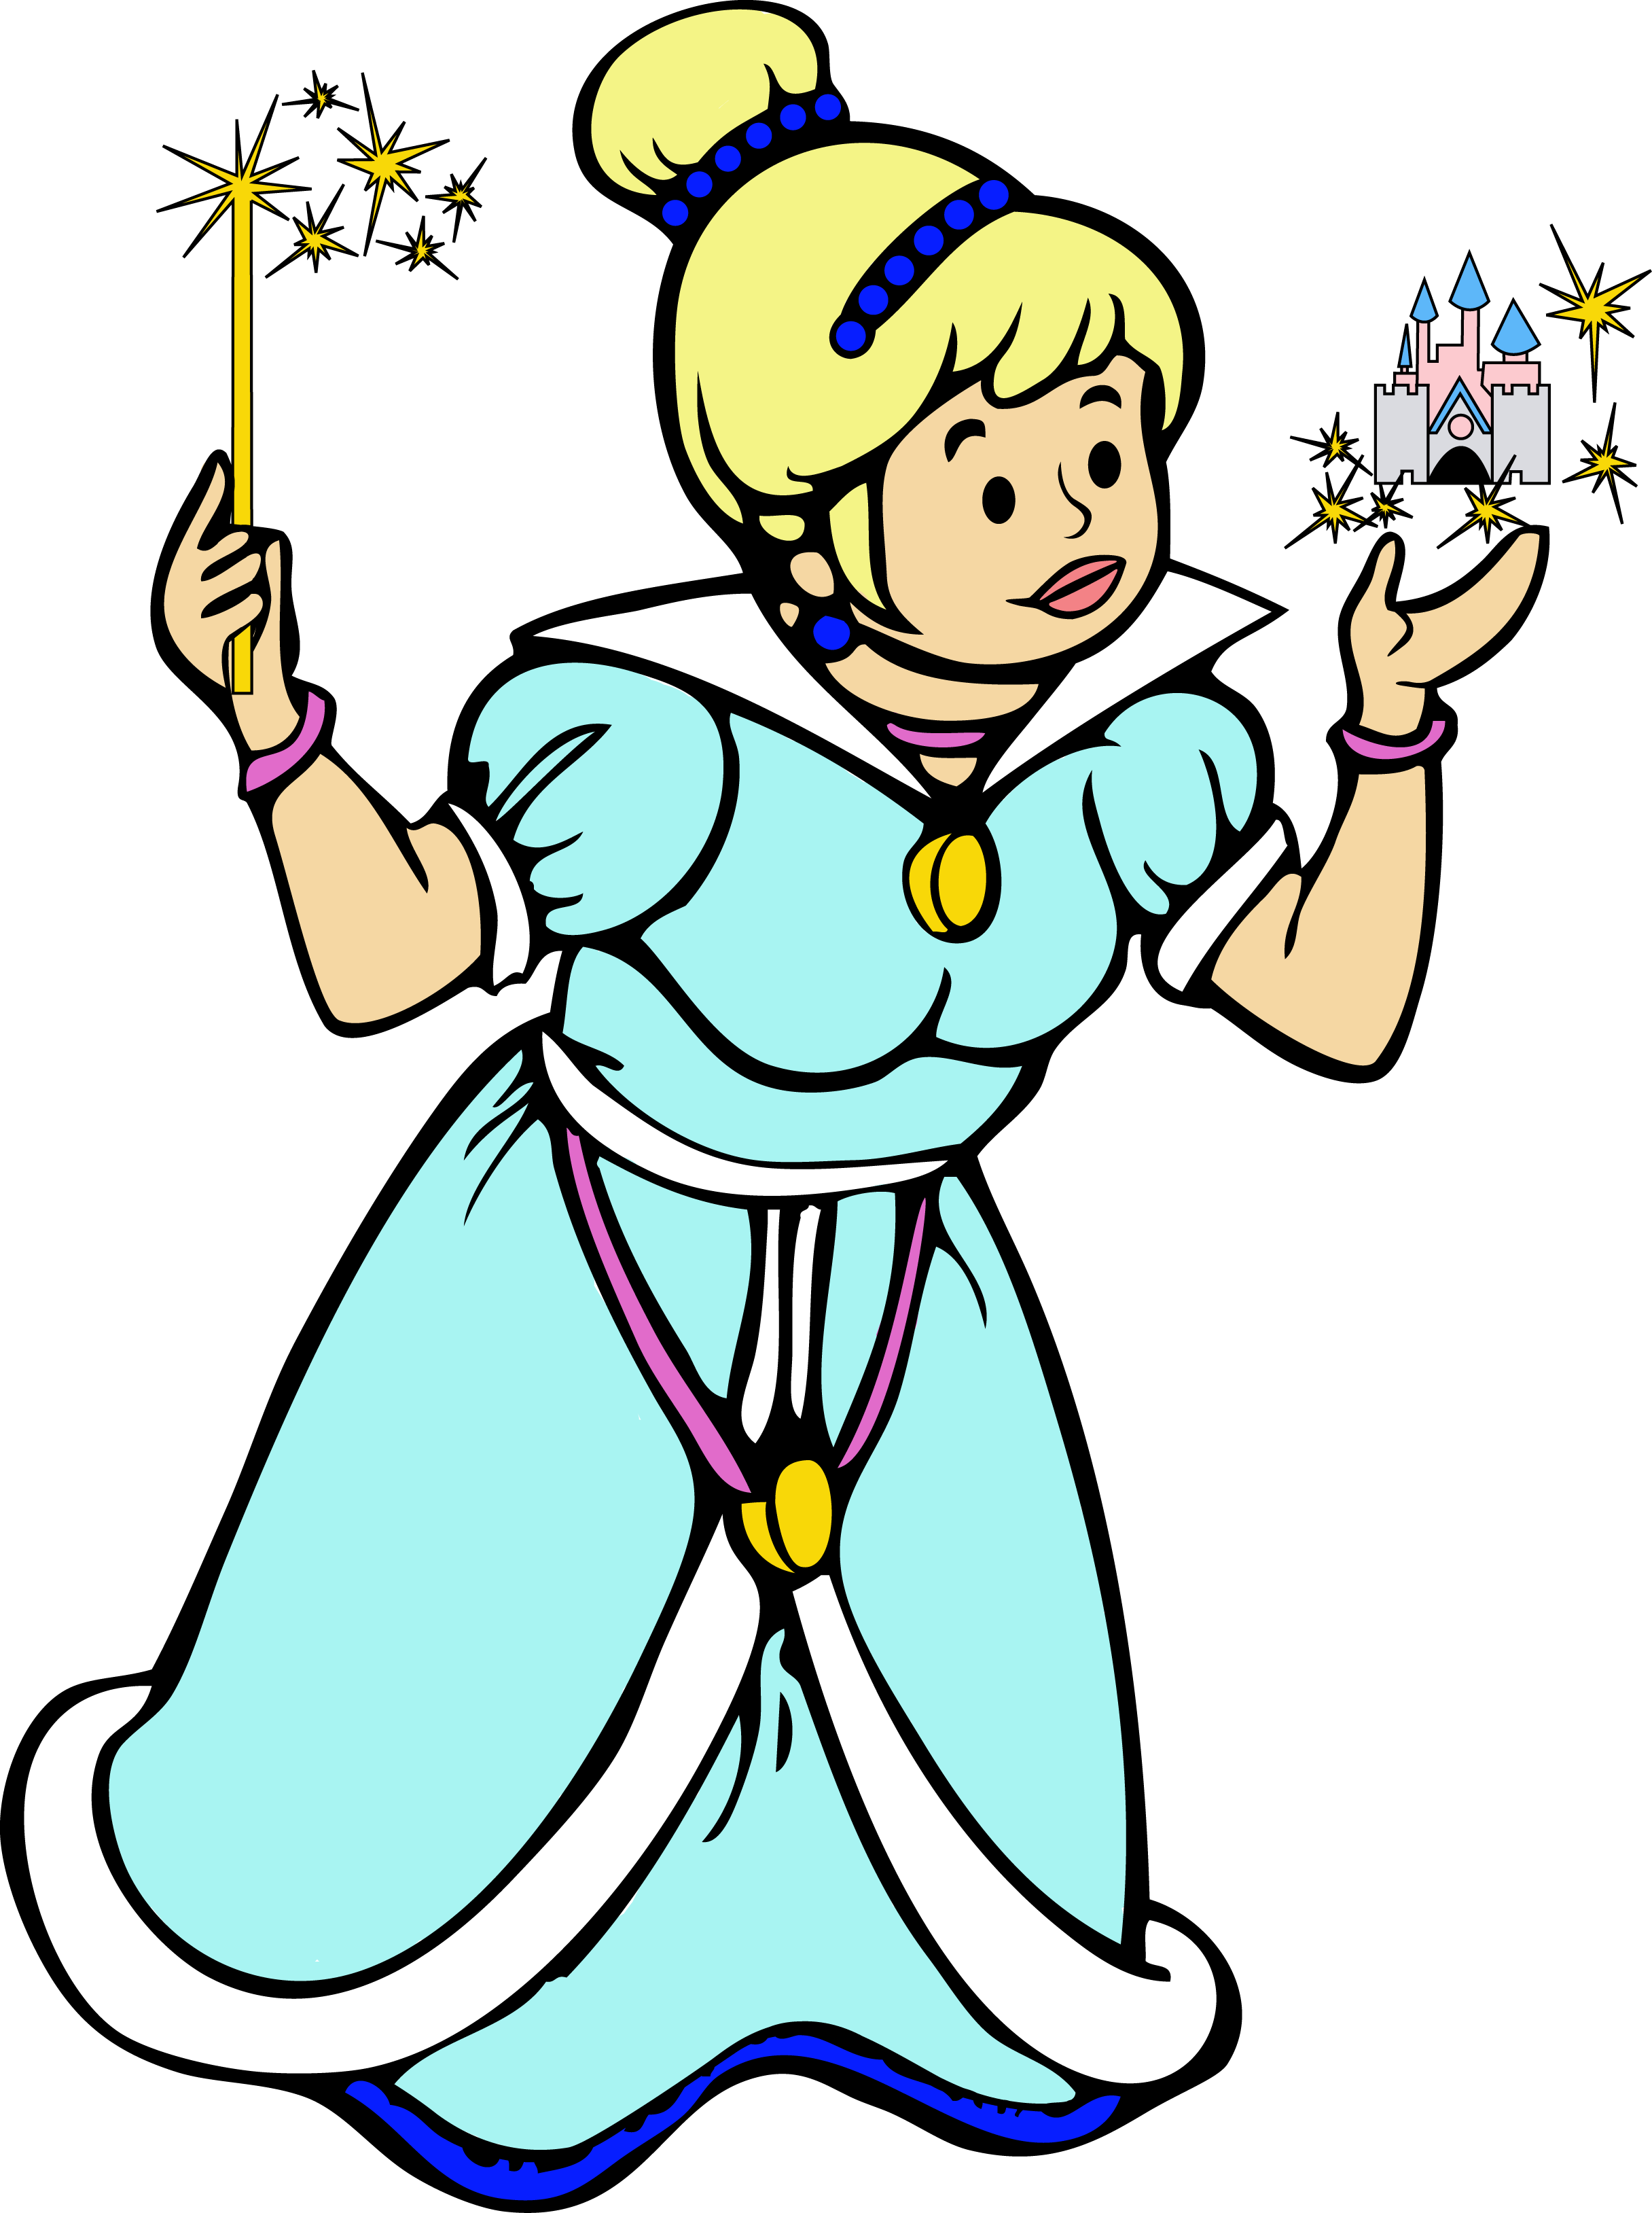 March A Thon Fairy Godmother Travel - Information (2432x3257)